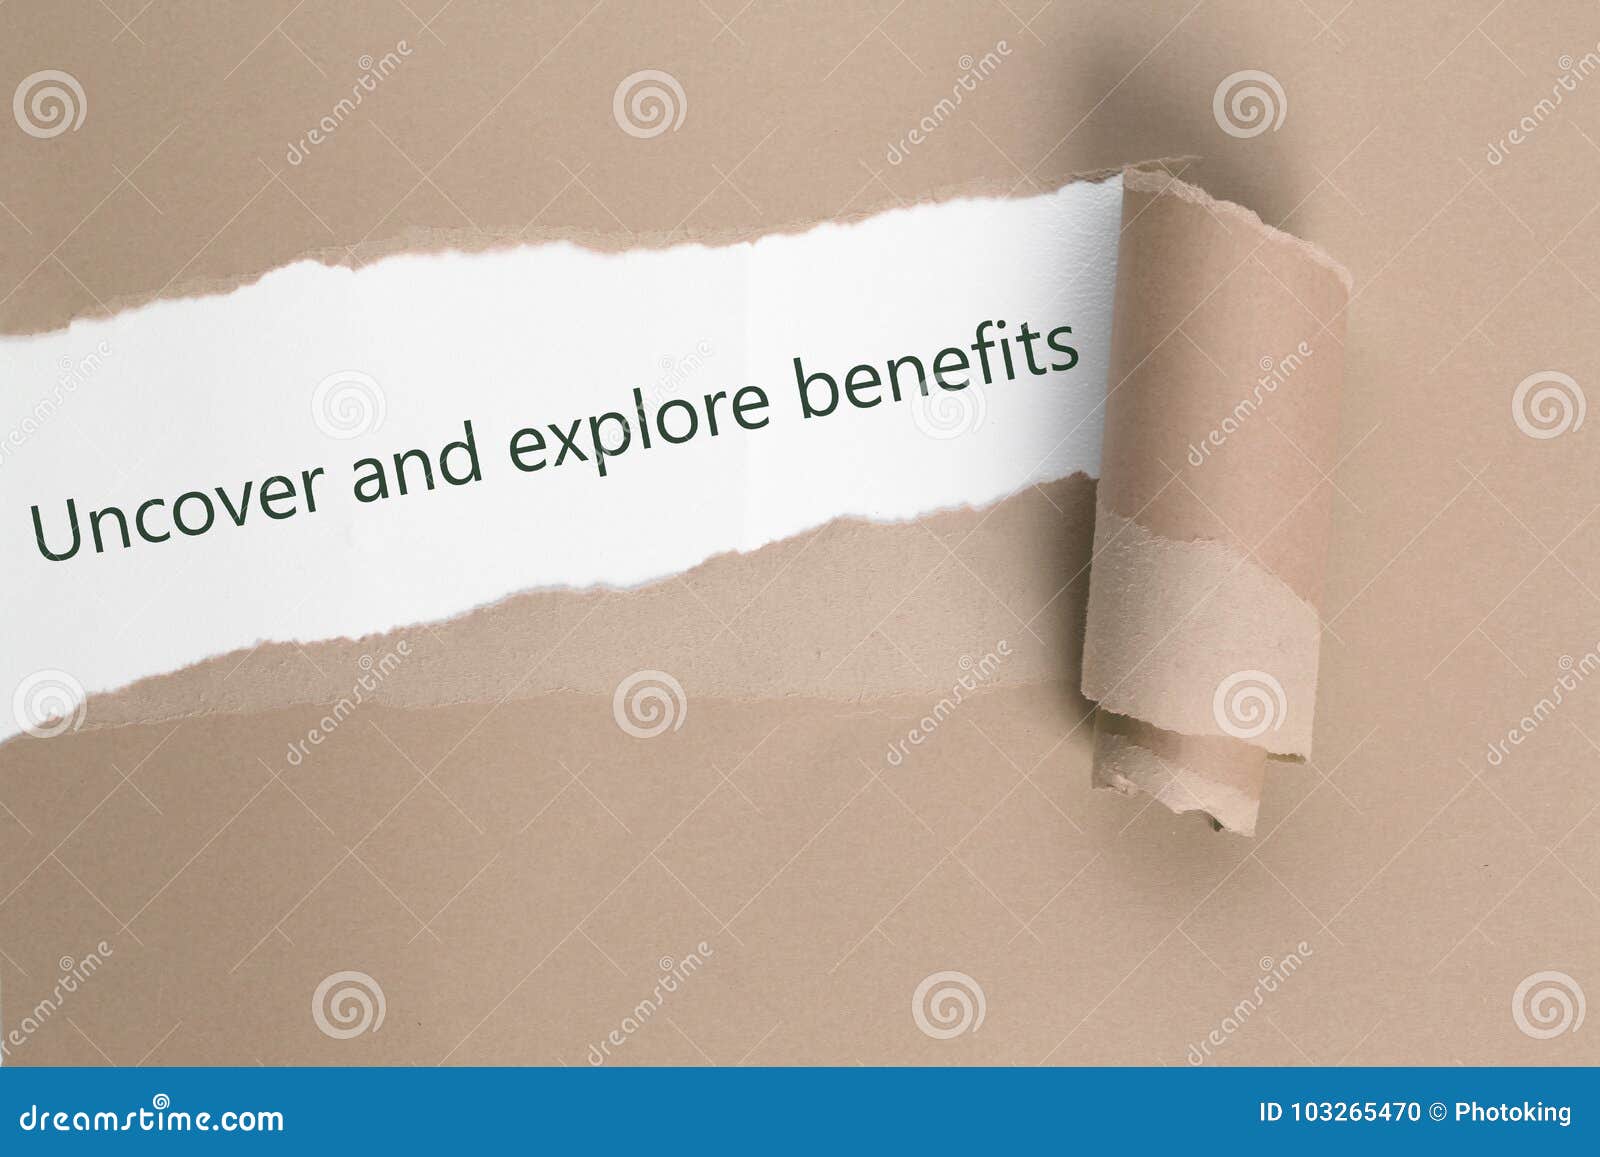 uncover and explore benefits